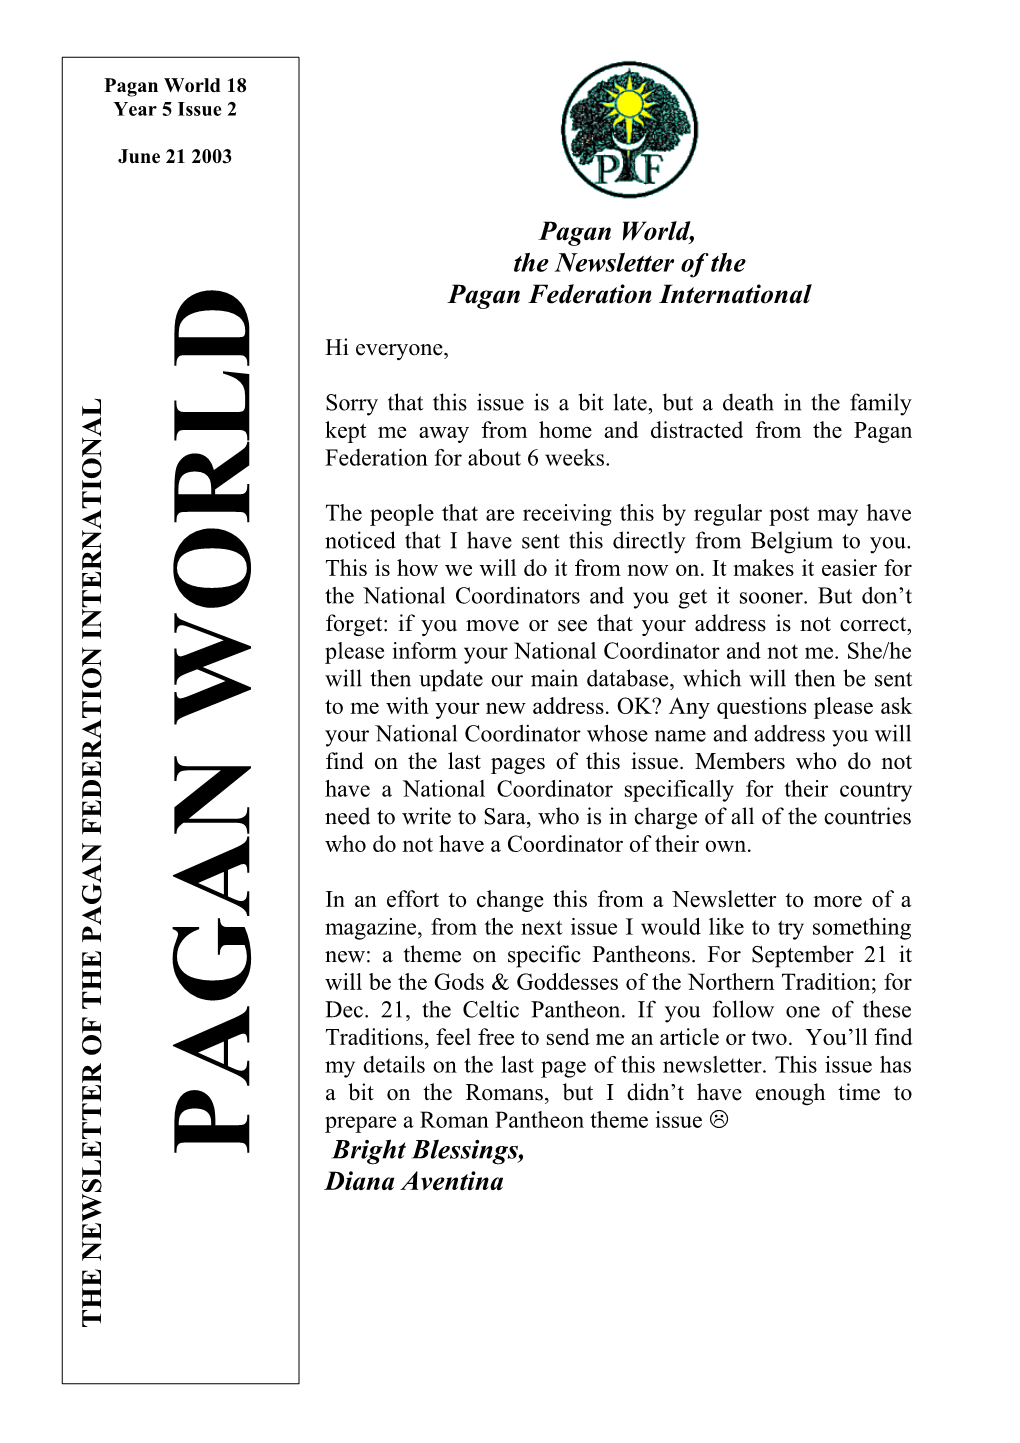 Pagan World the Newsletter of the Pagan Federation International s1